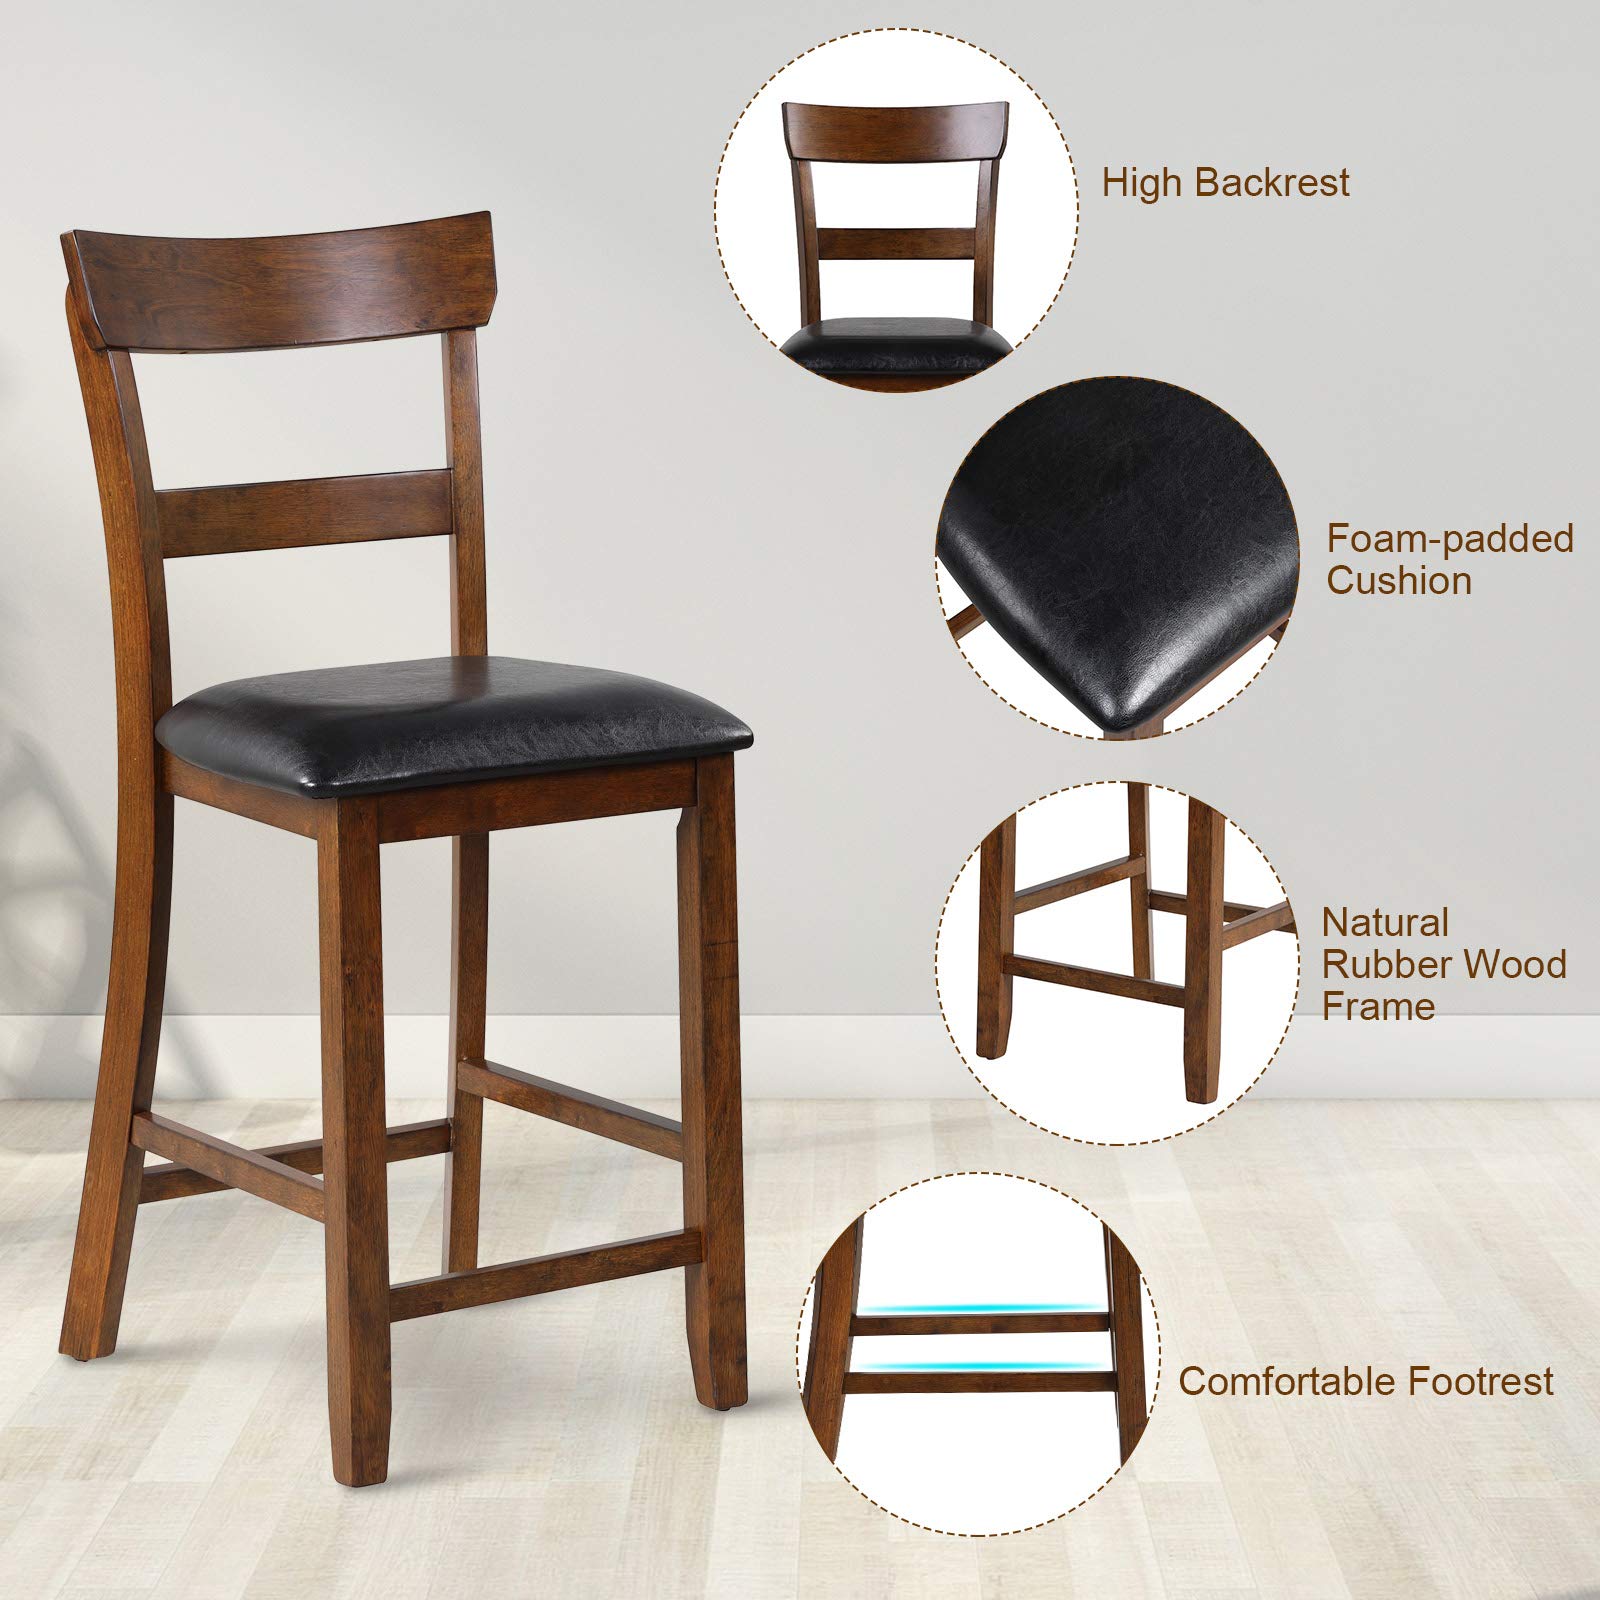 Giantex 25.5-Inch Counter Height Chair with Backrest, Foam-Padded Cushion, Rubber Wood Legs